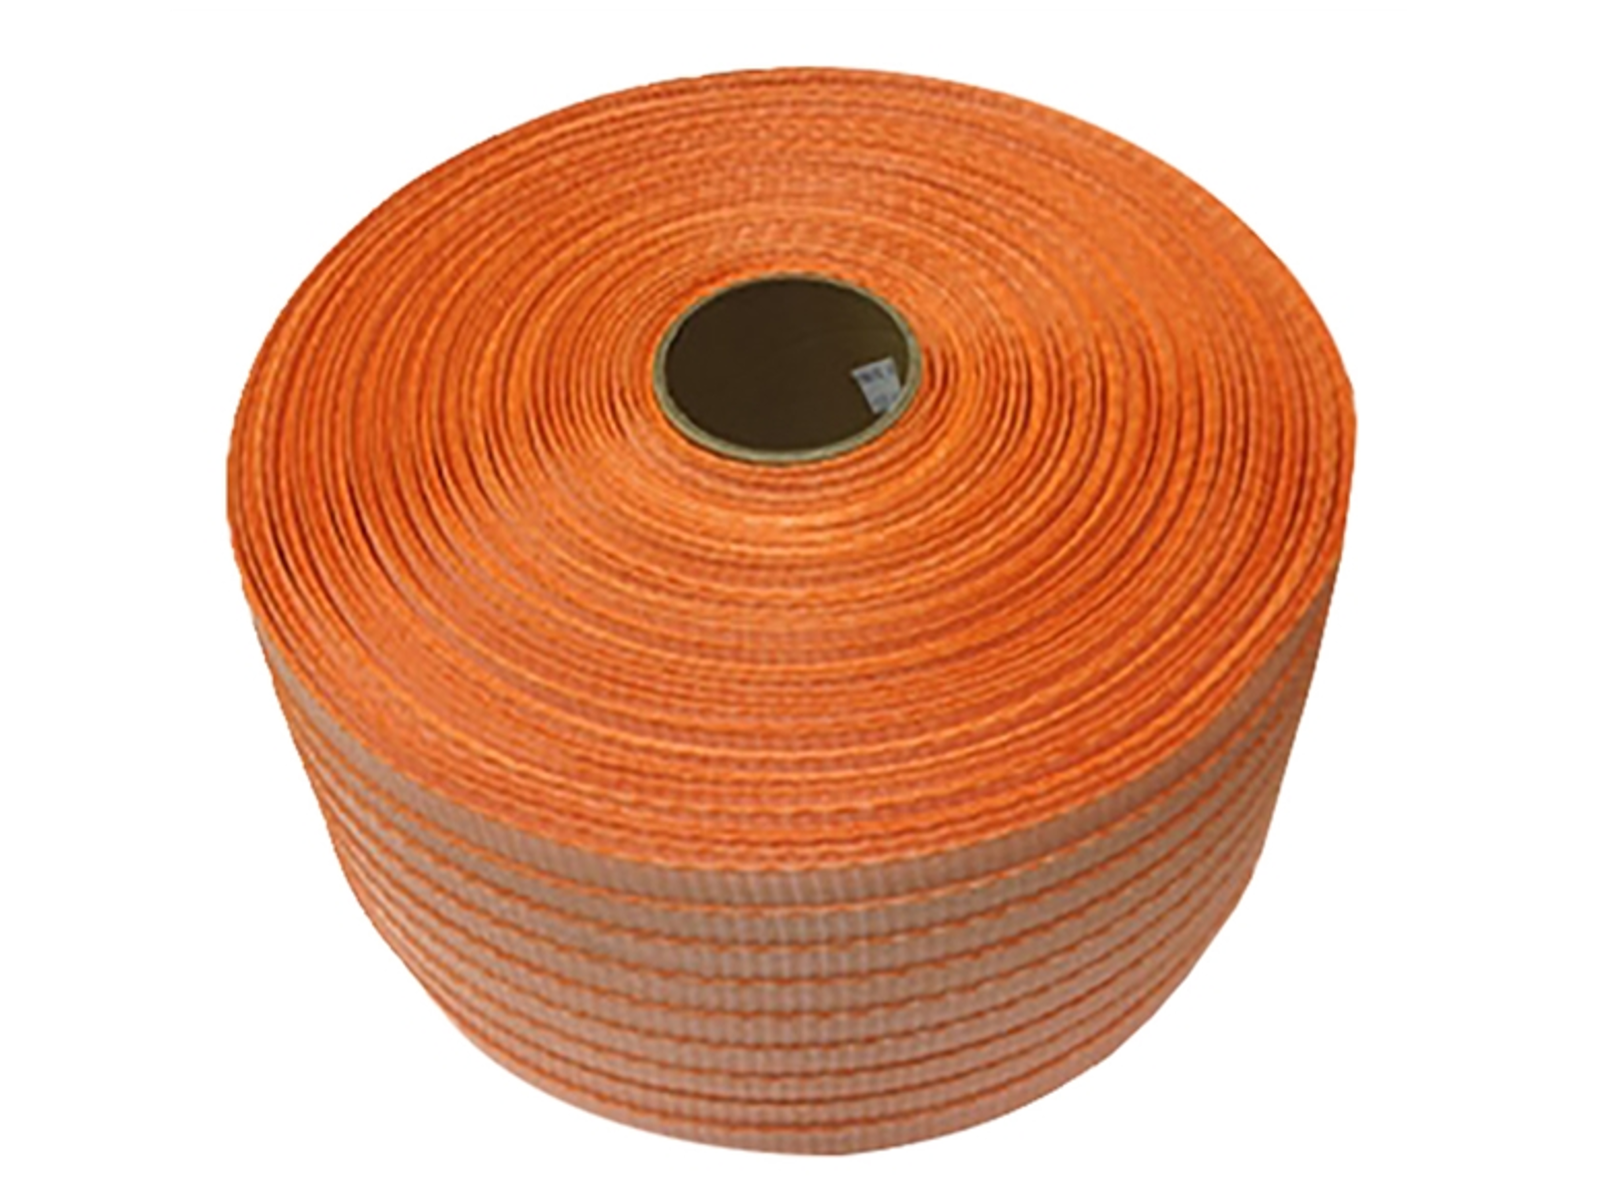 POLYESTER CORD STRAPPING
WOVEN HD 3/4&quot; 1650&#39; 2400 LBS
TEST 3&quot; CORE 2/RLS/CASE